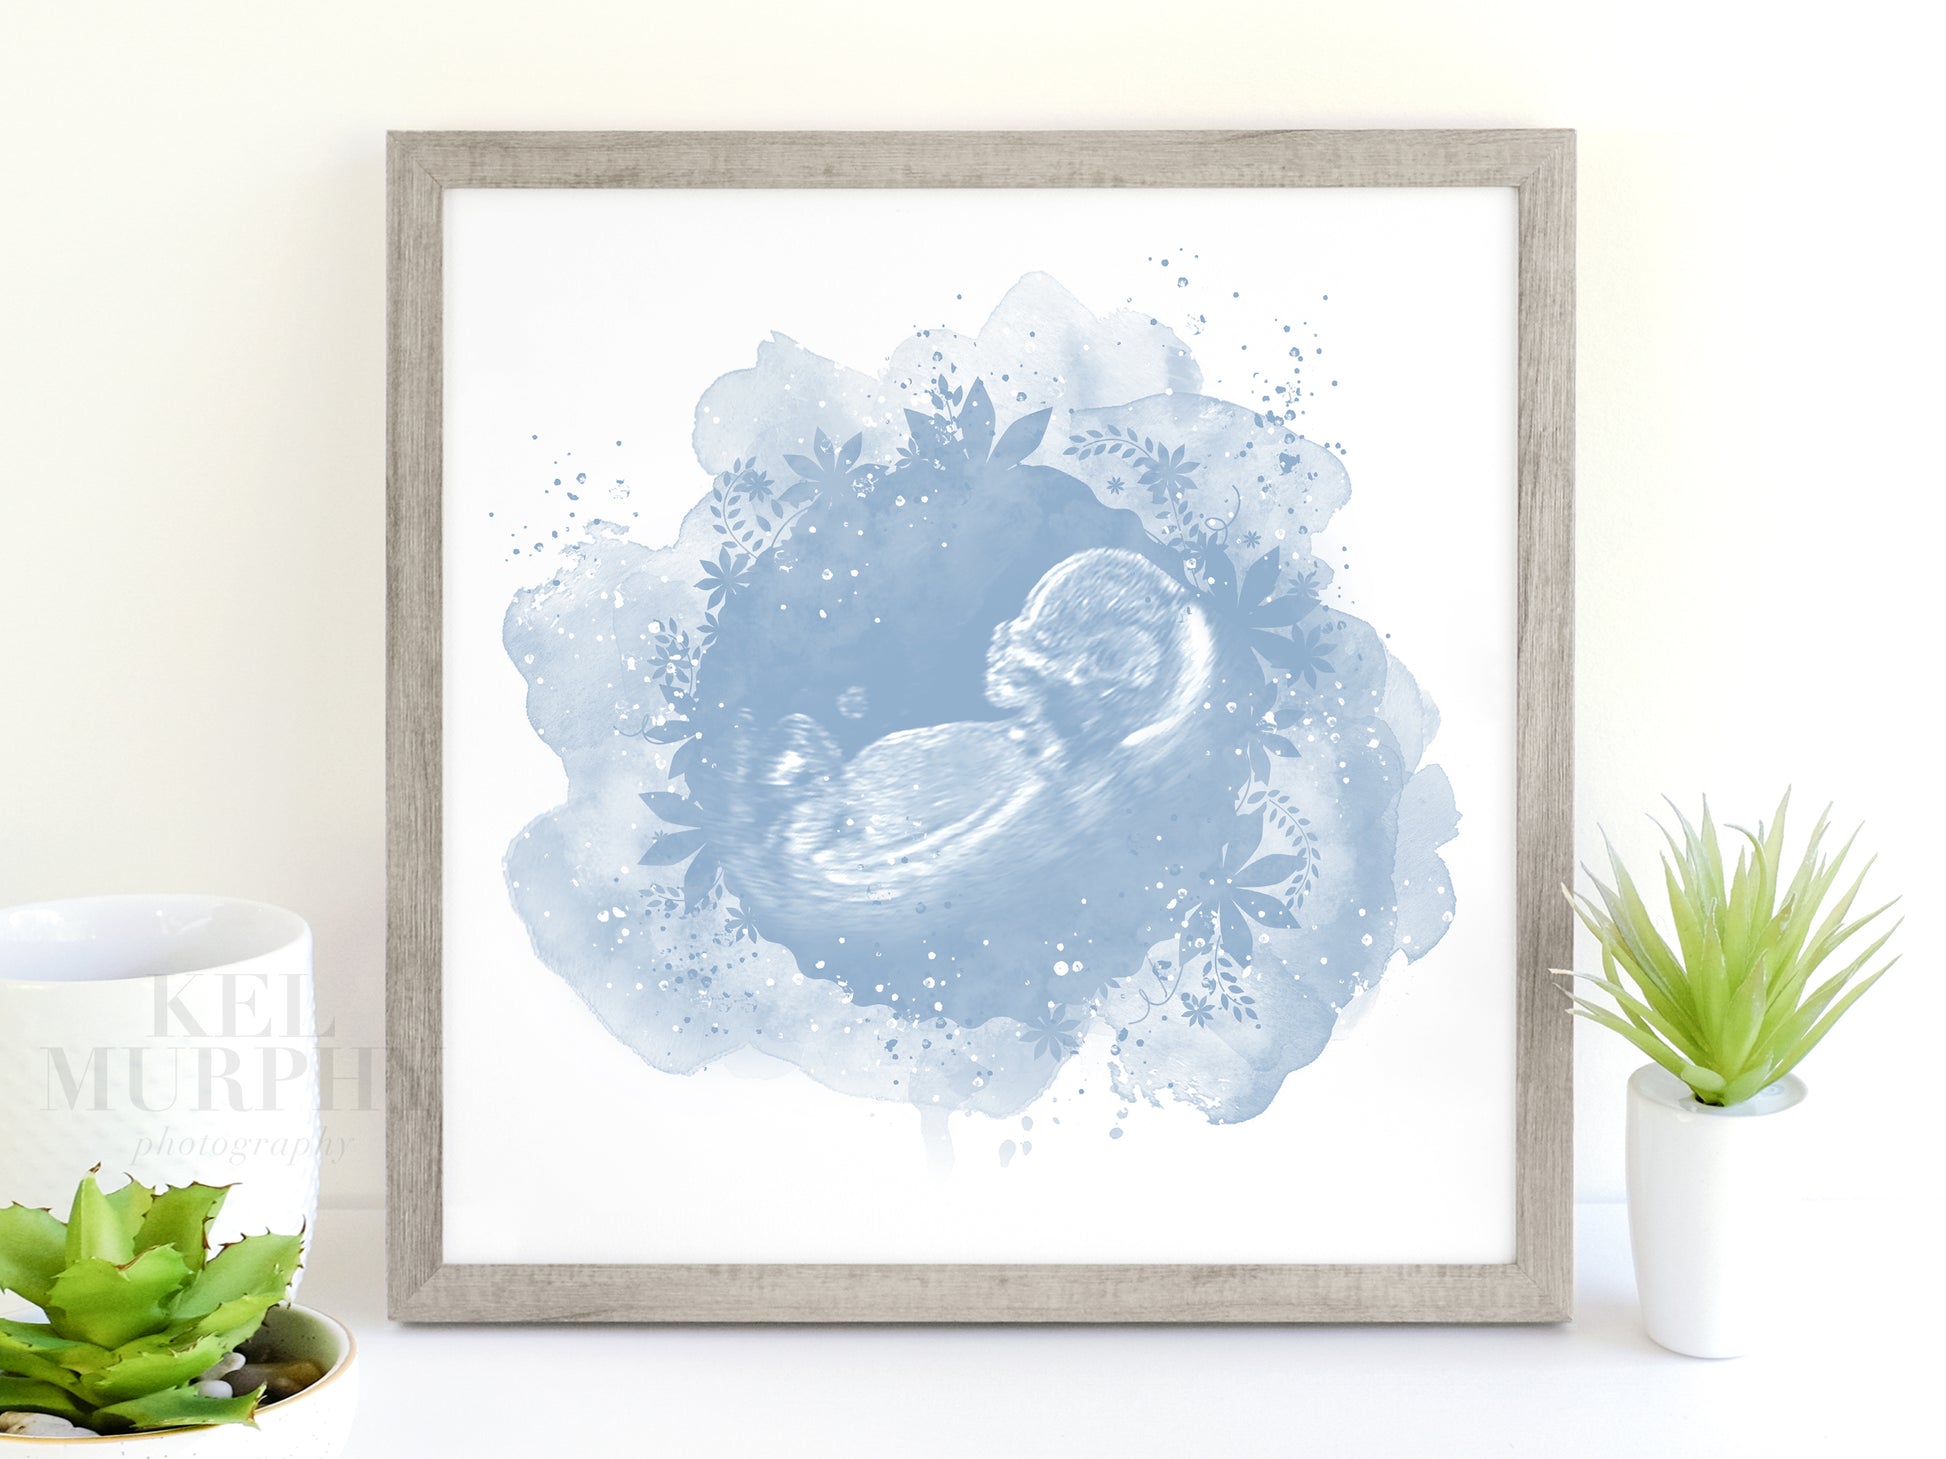 Ultrasound watercolor flowers custom art print personalized new mom gift